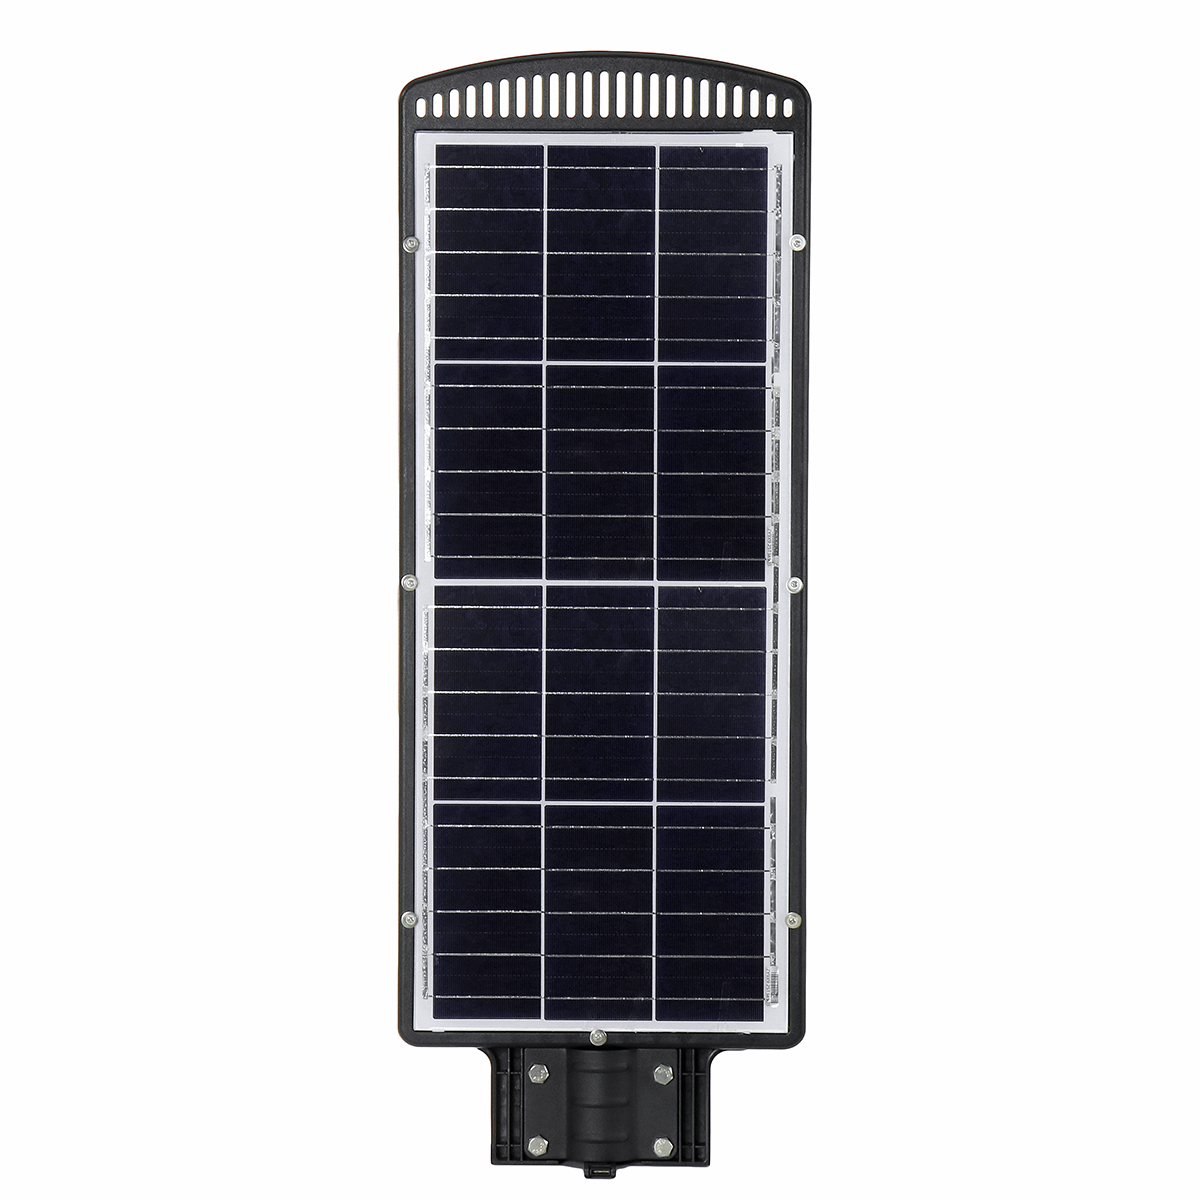 Find 3800W 1152 LED Solar Street Light Motion Sensor Outdoor Garden Wall Lamp Remote for Sale on Gipsybee.com with cryptocurrencies